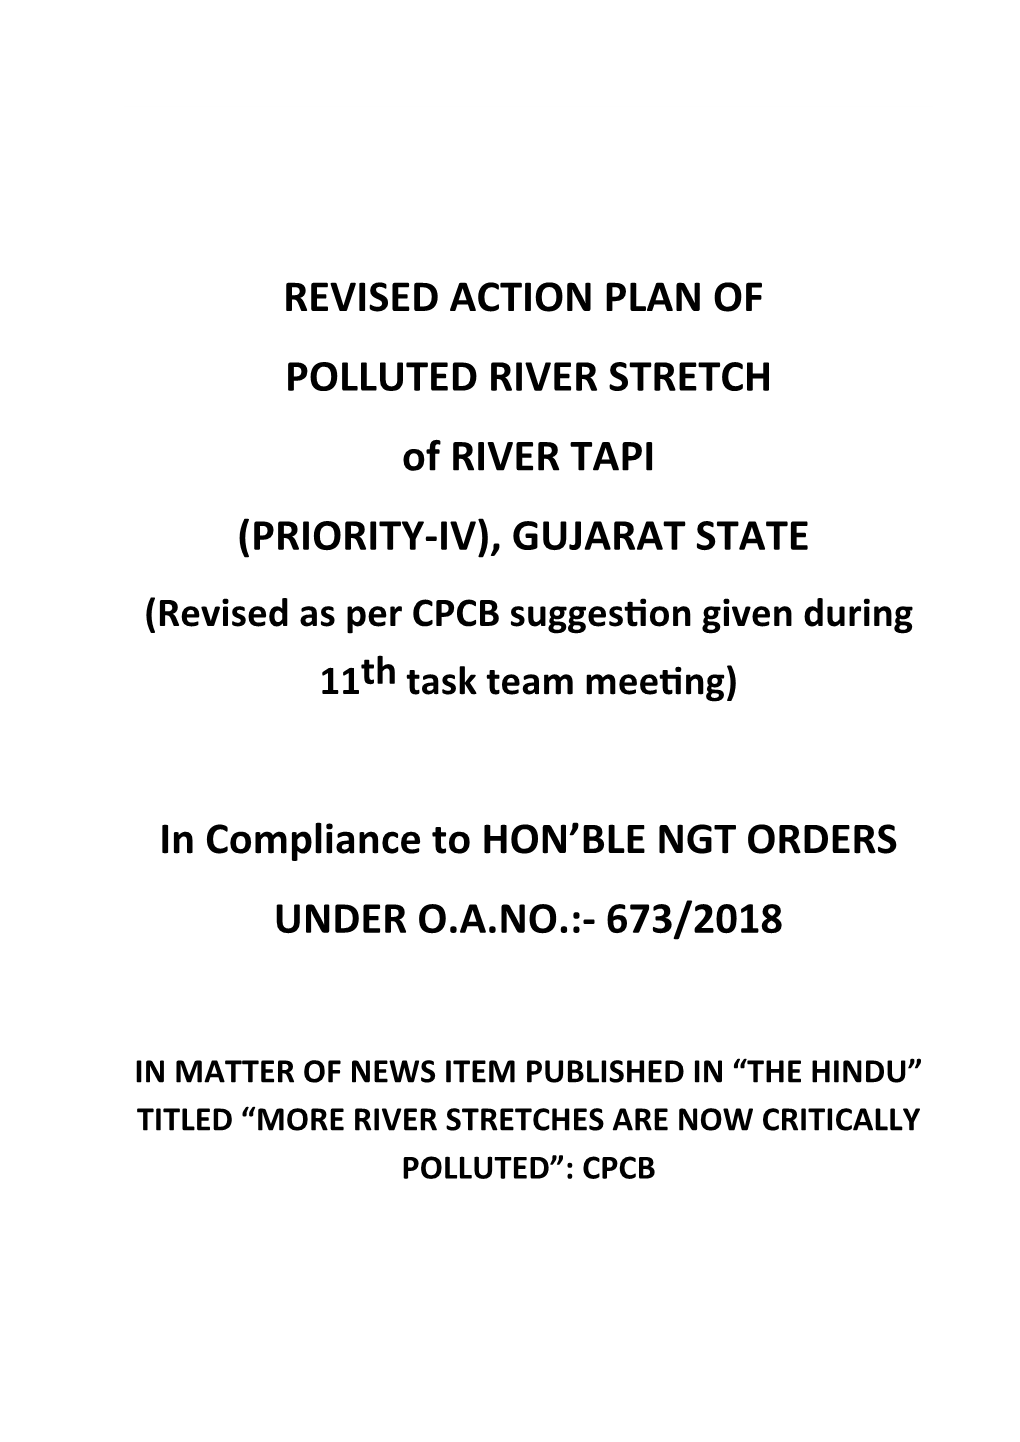 Revised Action Plan of River Tapi As